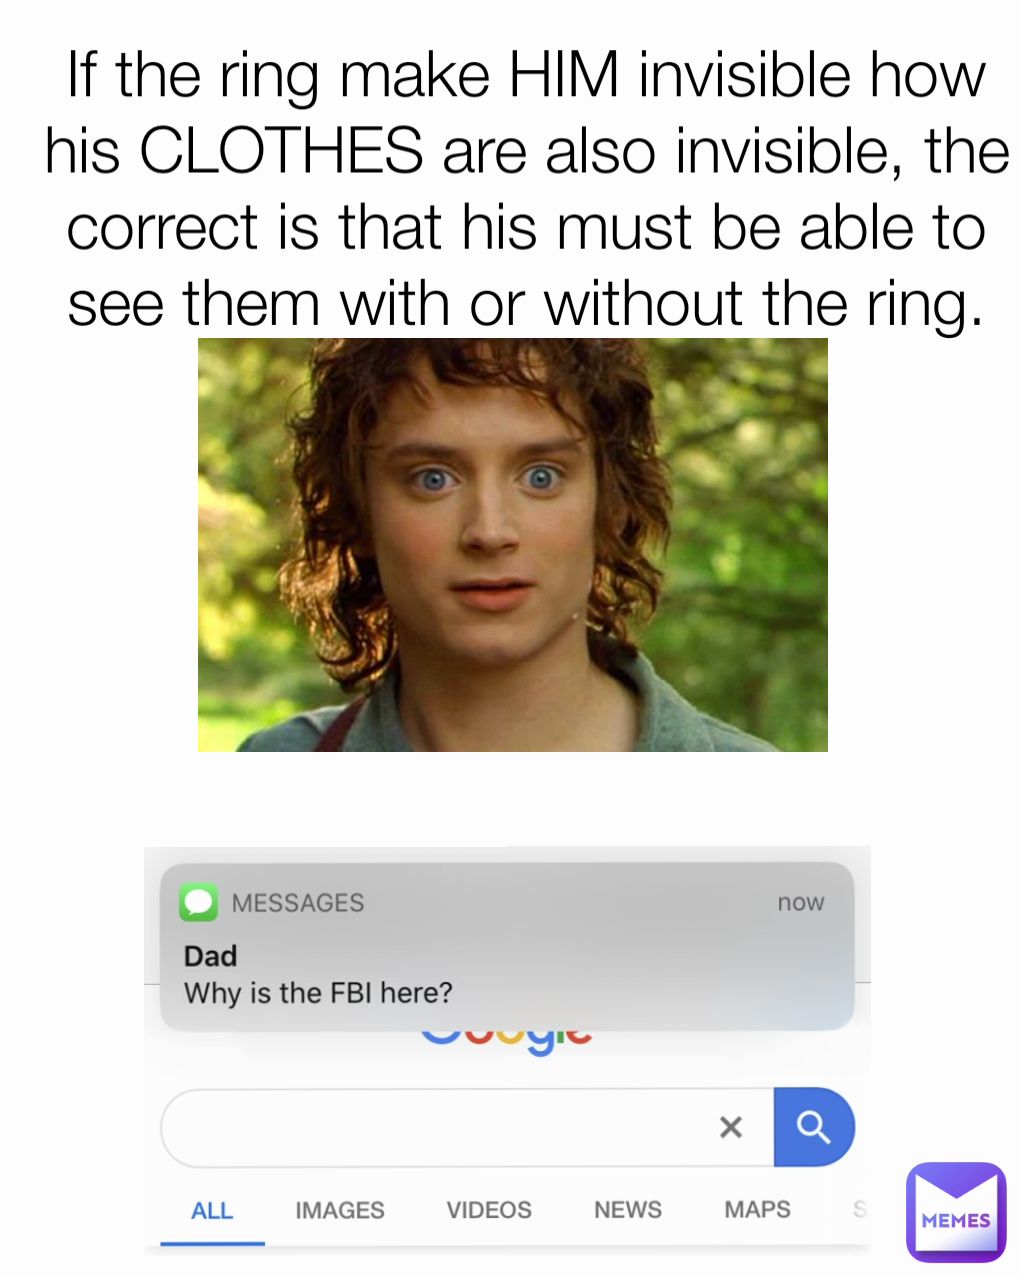 If the ring make HIM invisible how his CLOTHES are also invisible, the correct is that his must be able to see them with or without the ring.